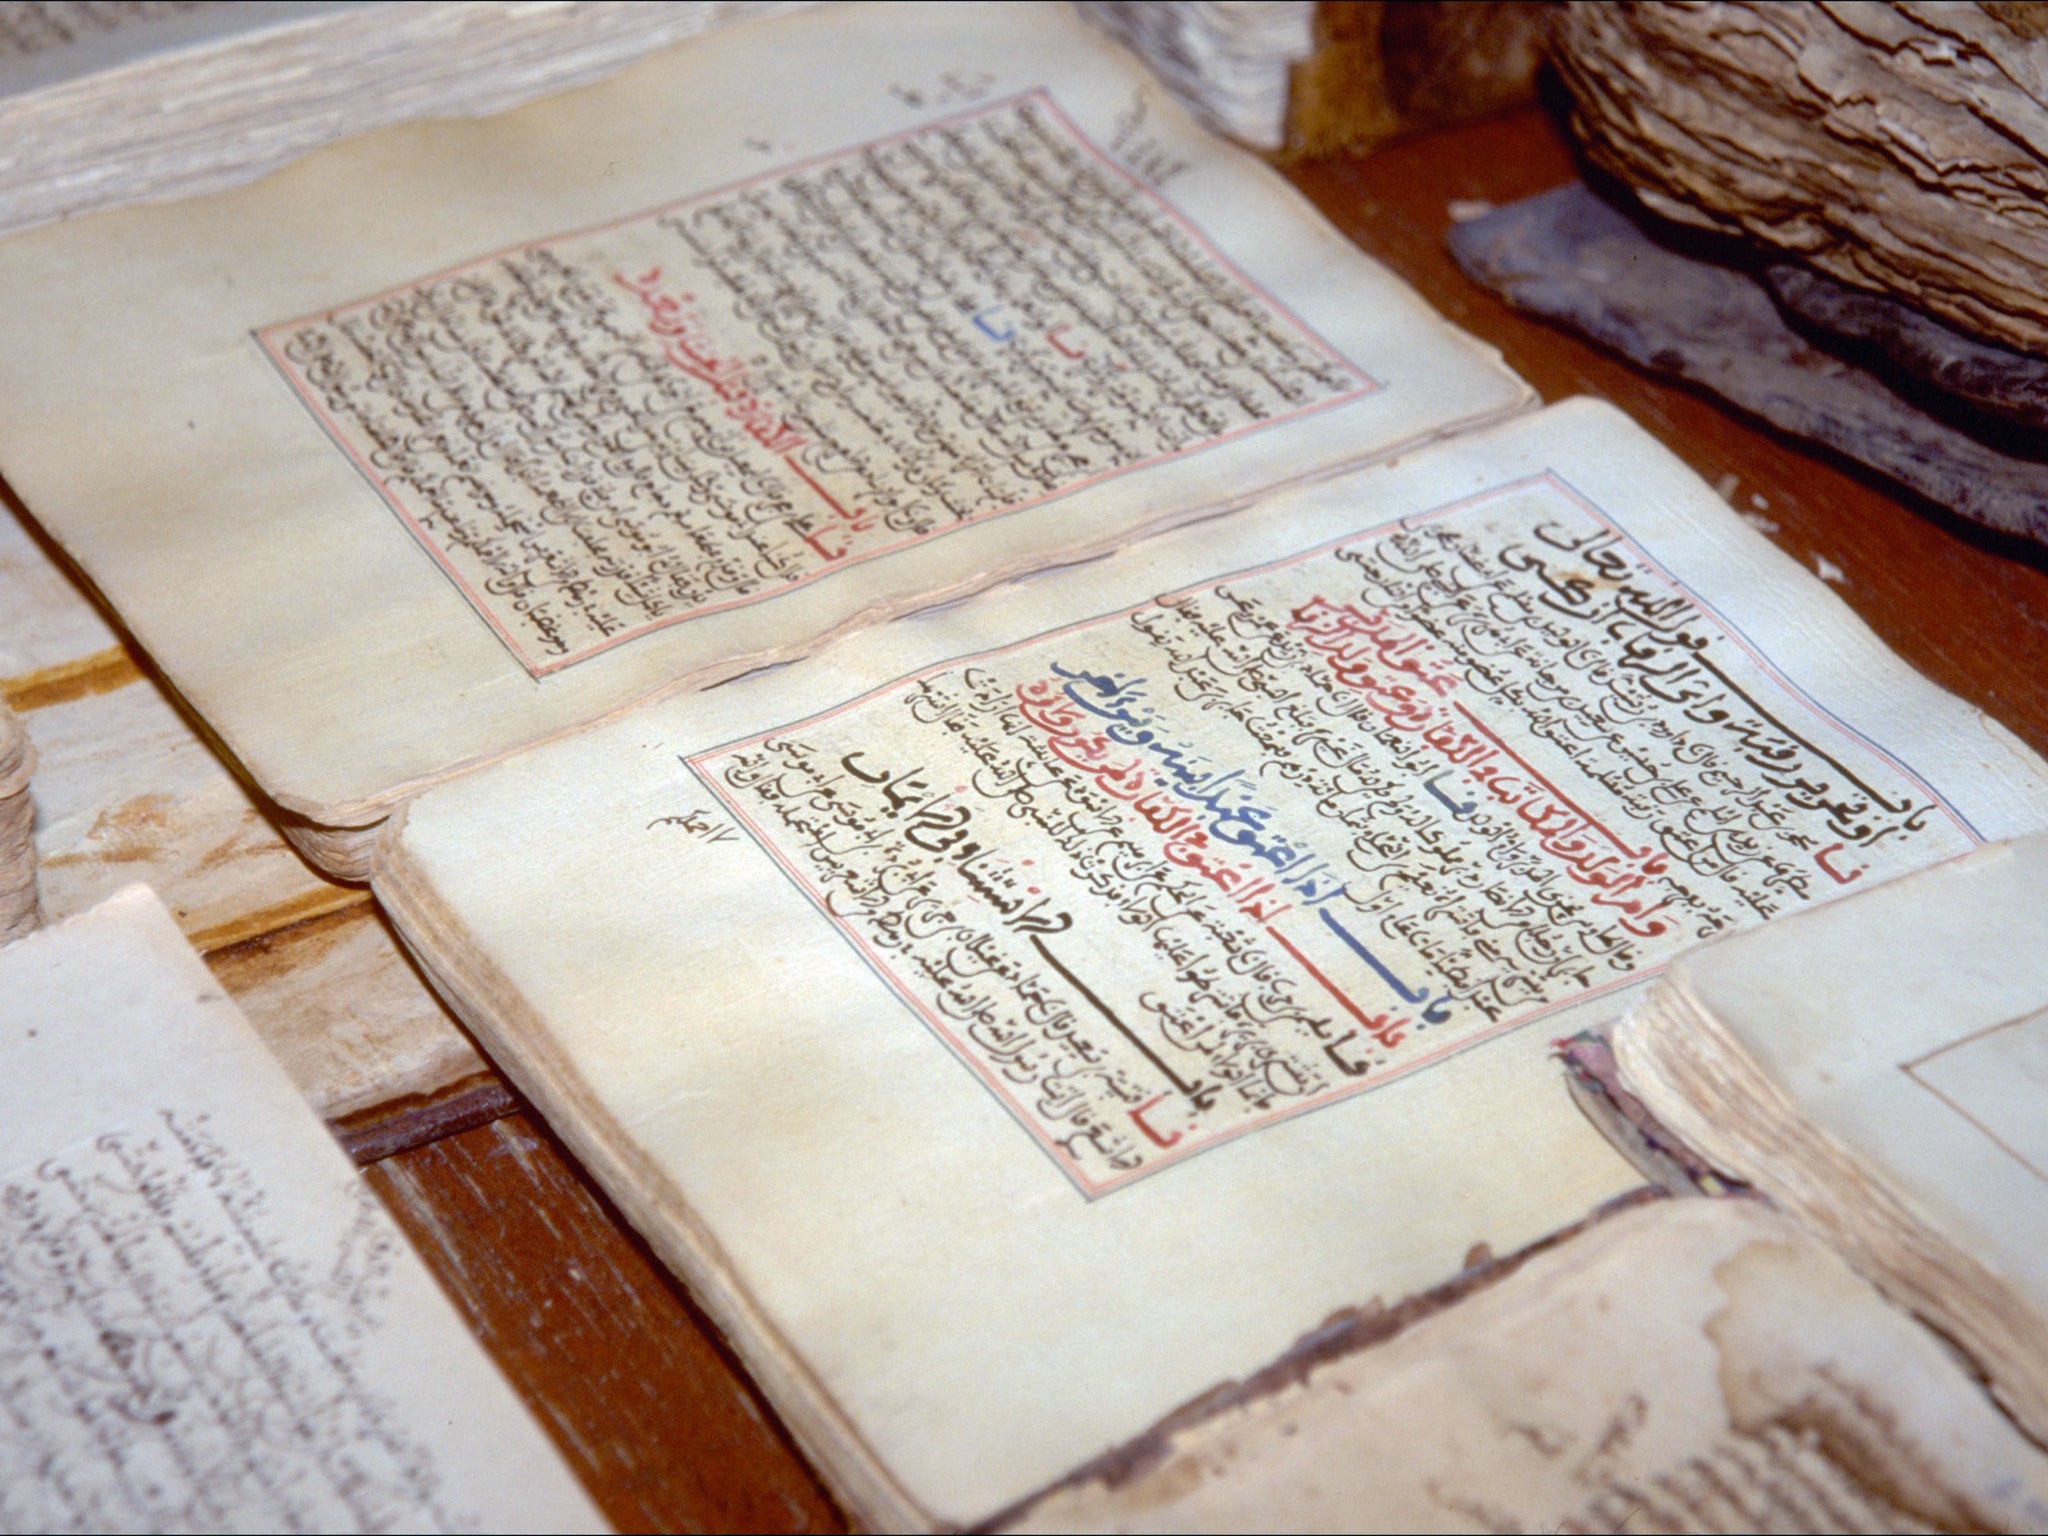 Ancient manuscripts on display at the library in Timbuktu. Mali was home to many prolific mathematicians.